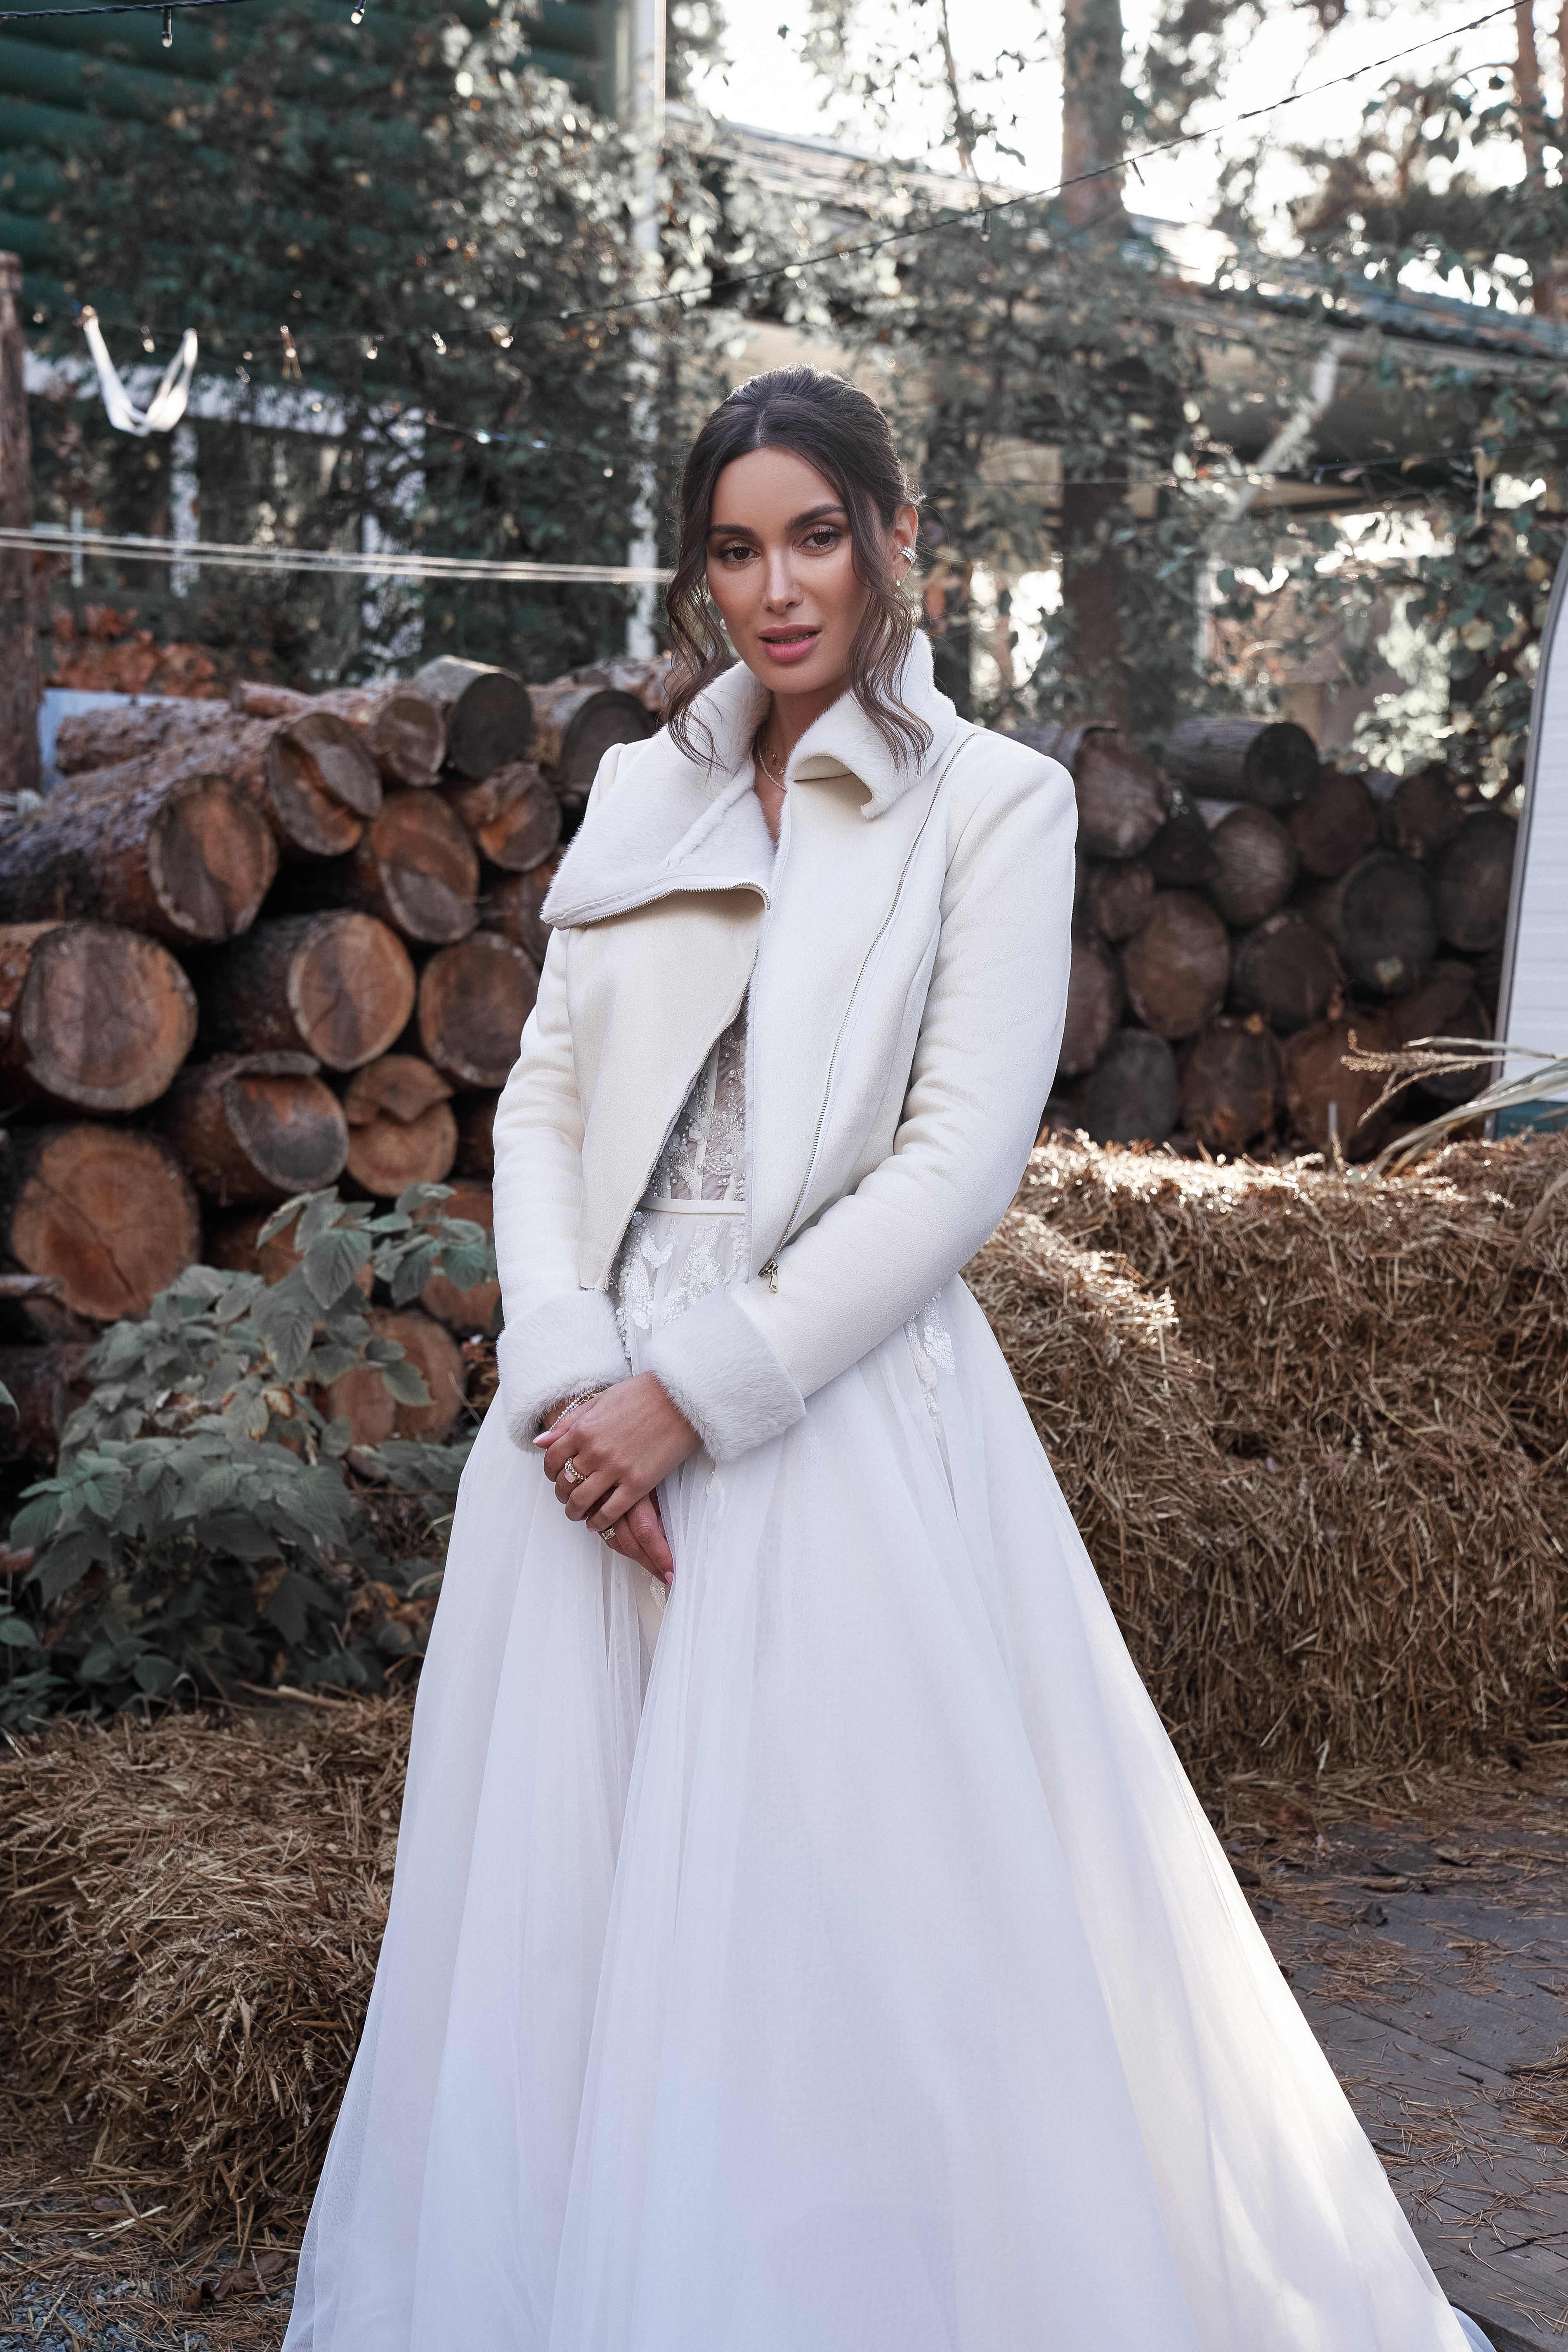 Sheepskin coat for a bride in ivory pearl color.